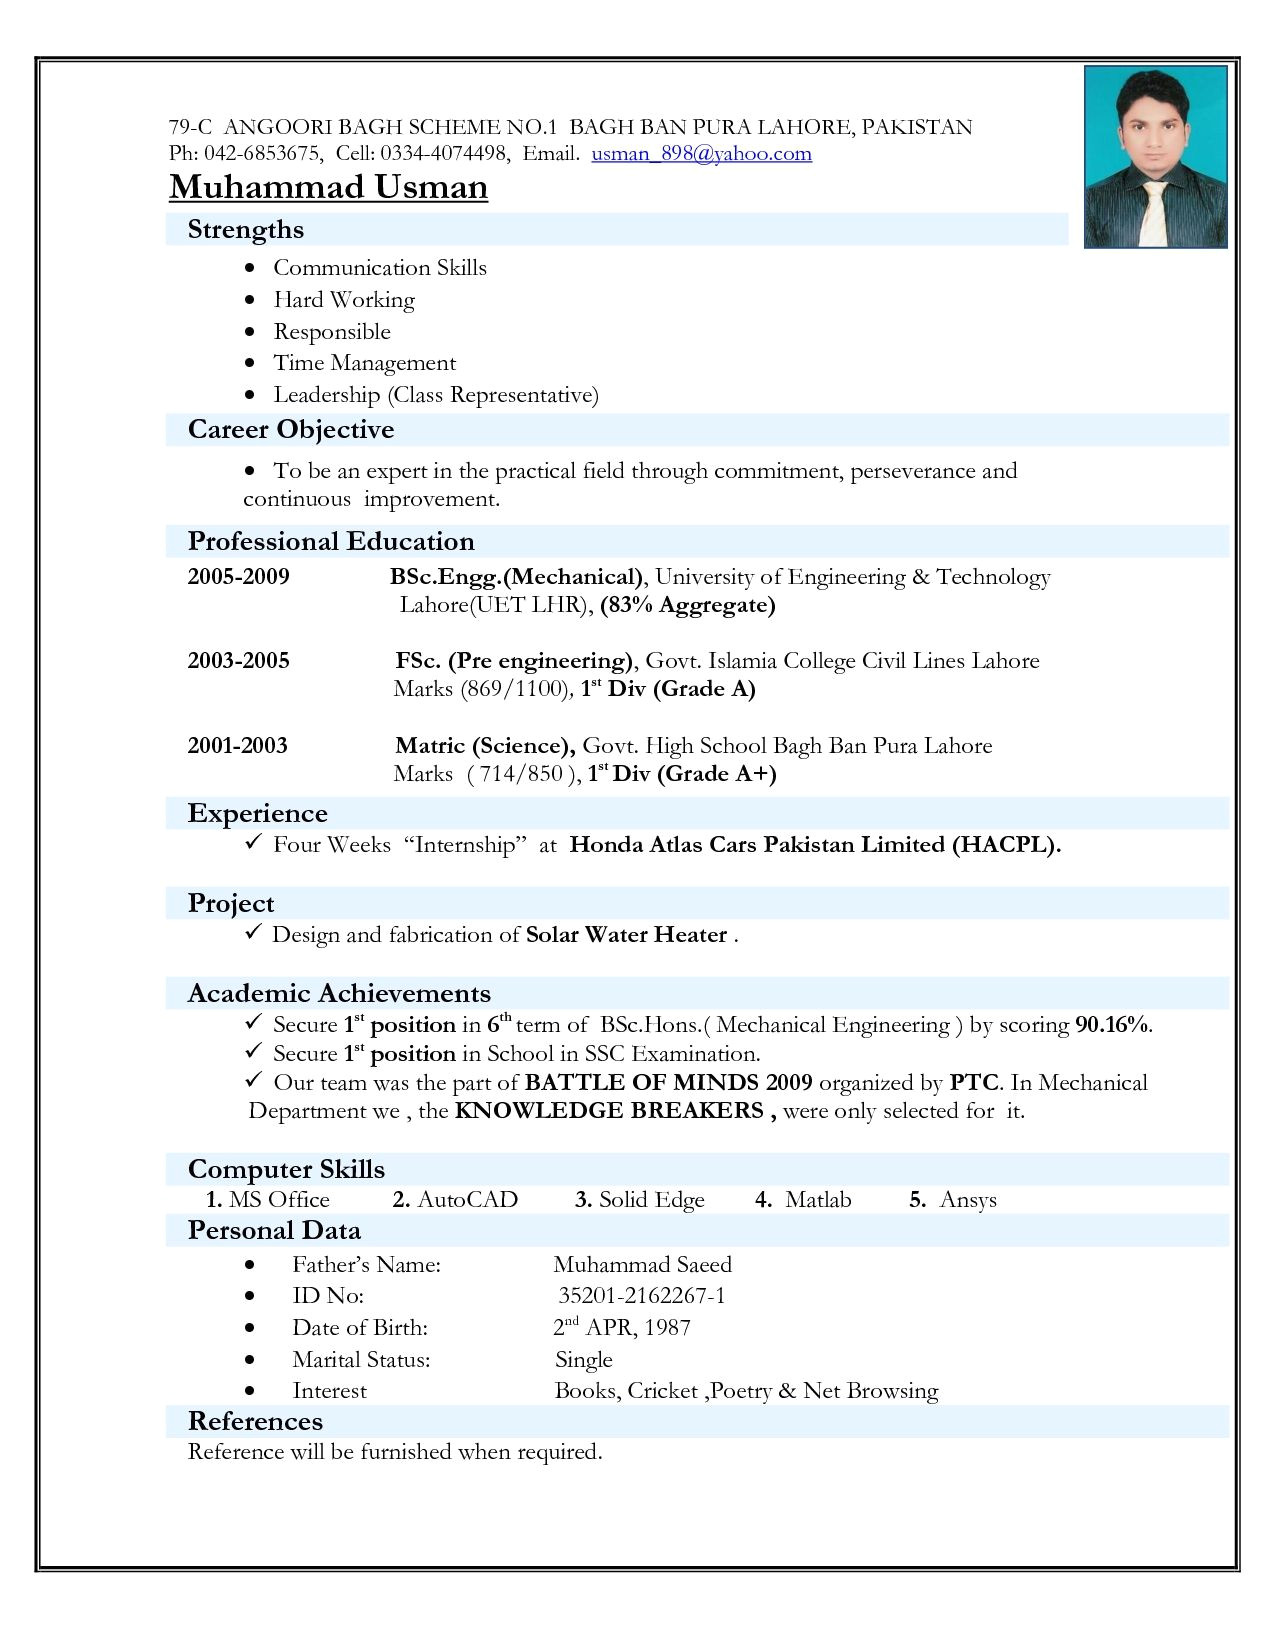 resume format for freshers civil engineers pdf free download